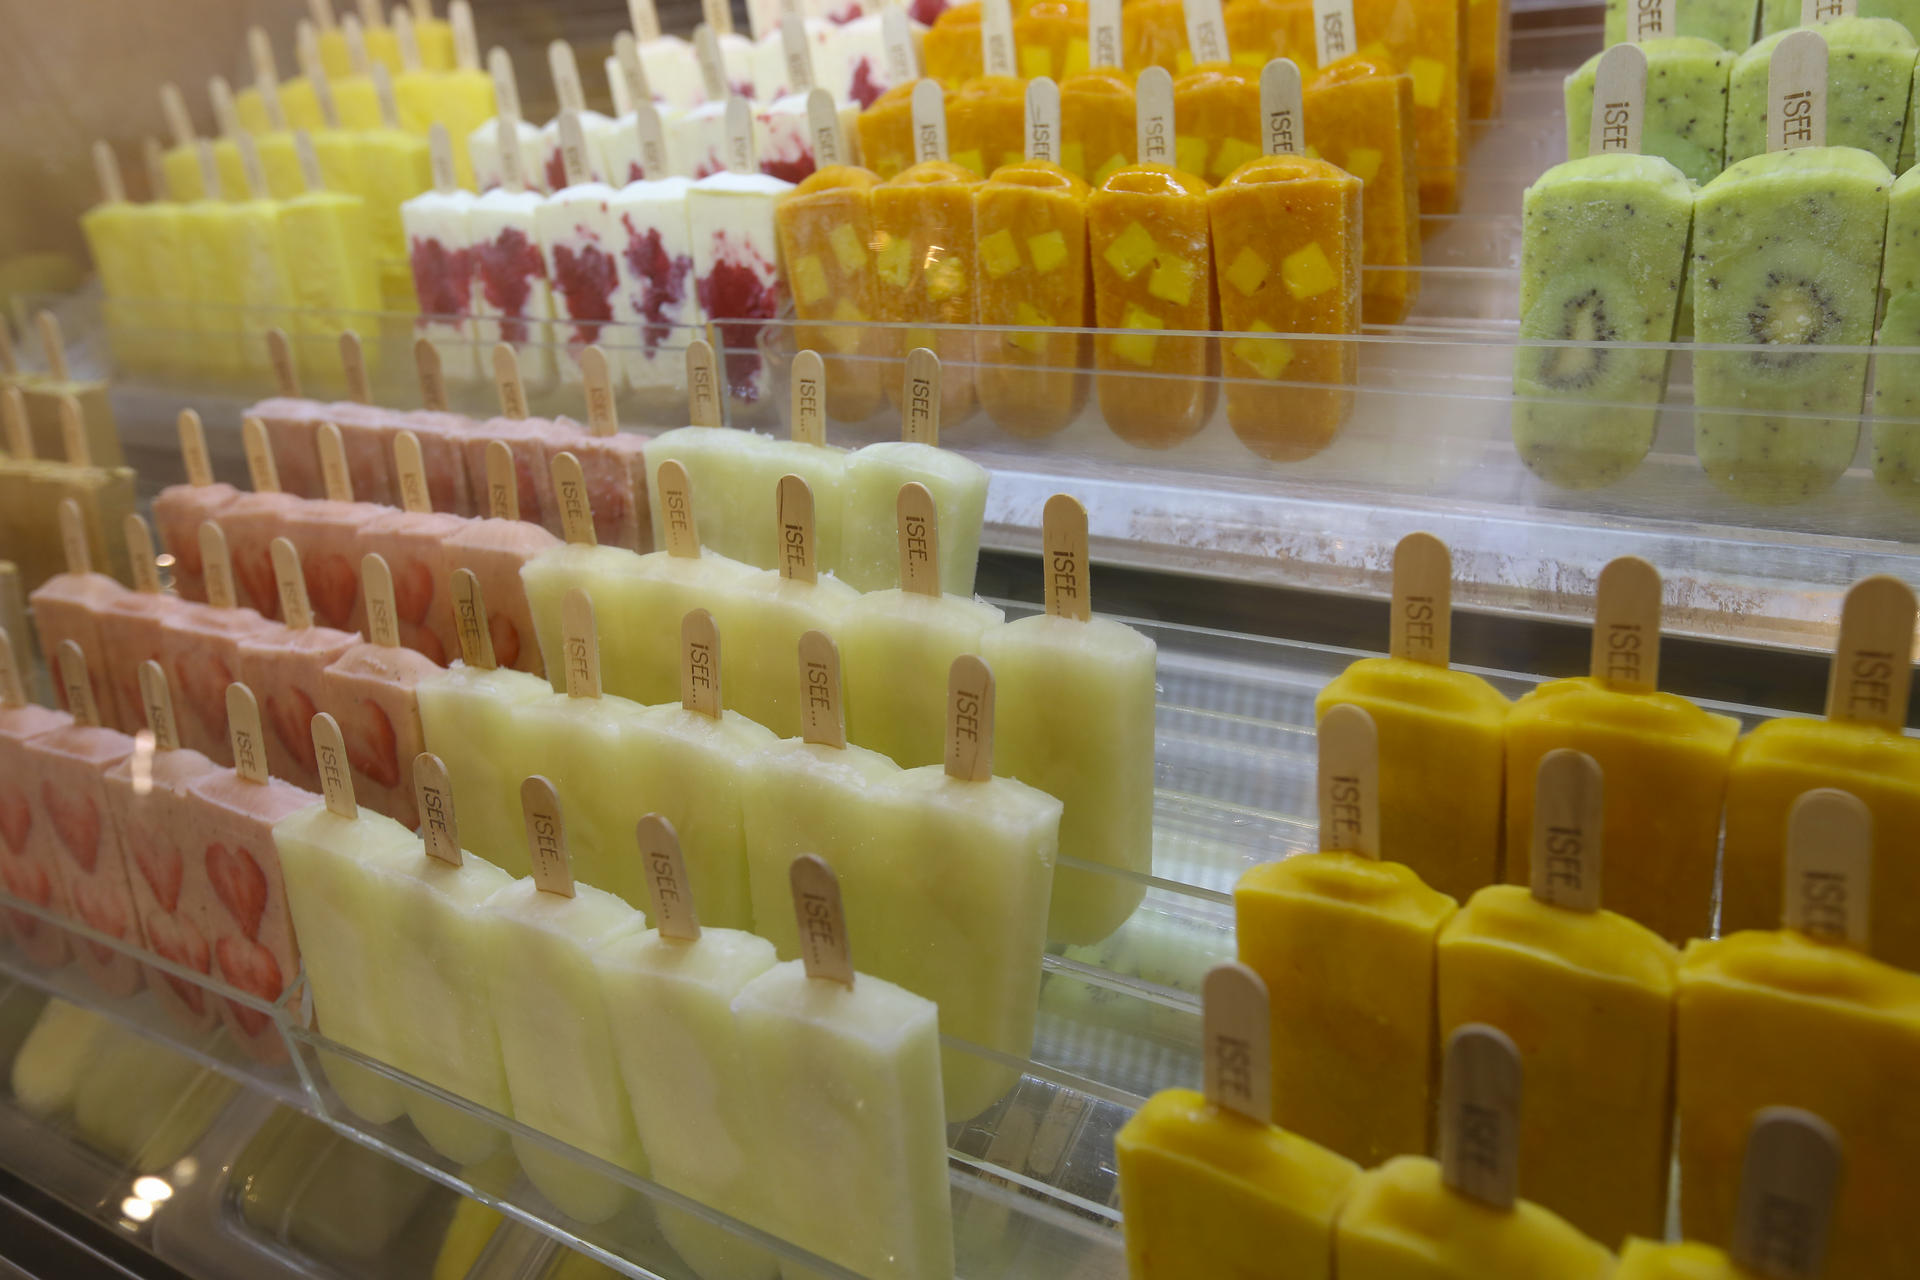 I See I See's many ice lolly flavours. Photos: Edmond So